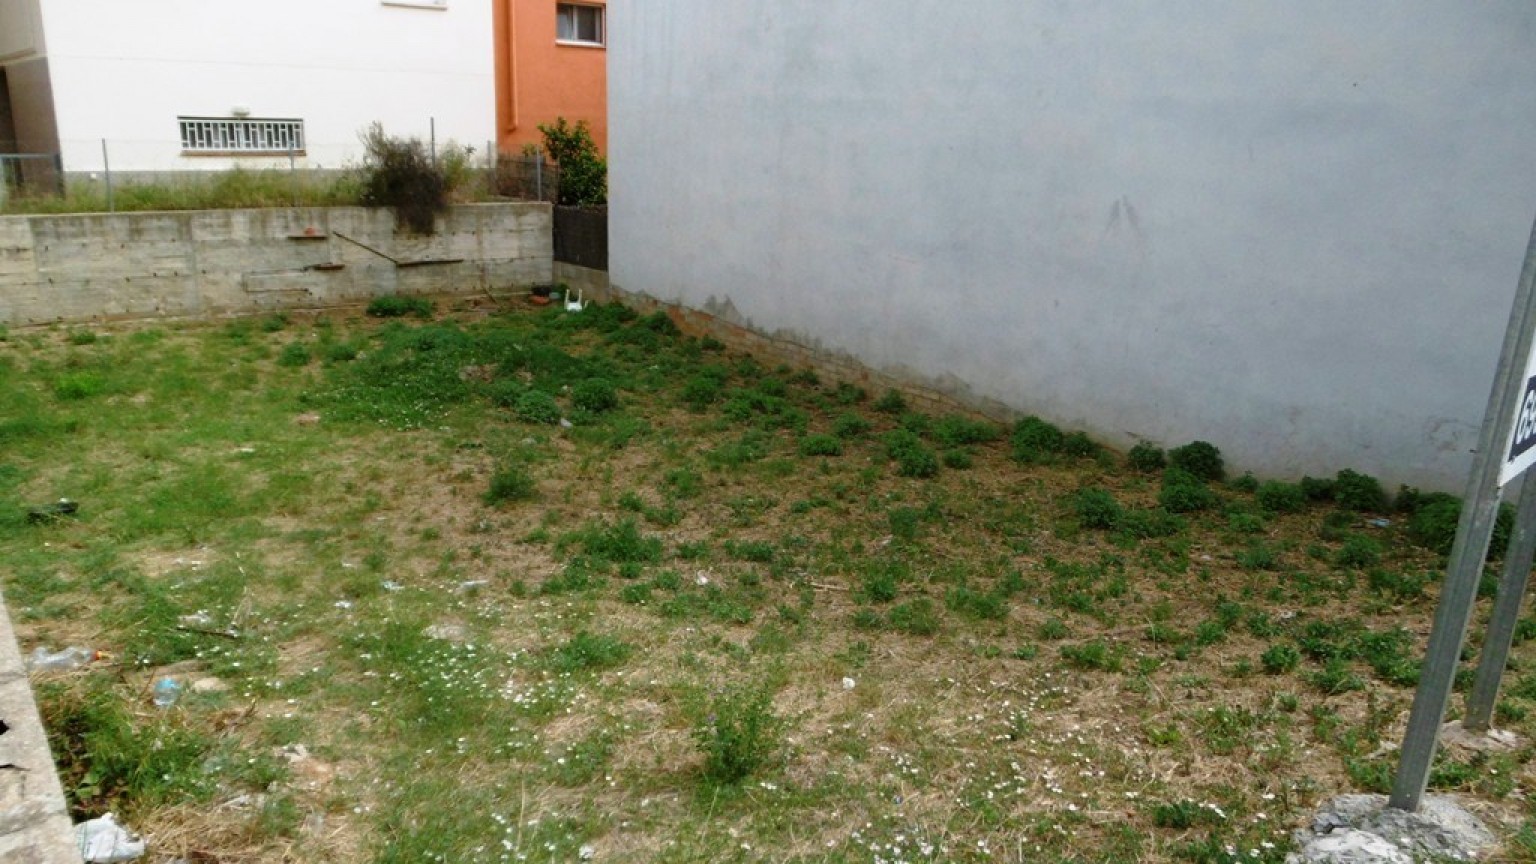 Piece of land for sale in the center of la Vila